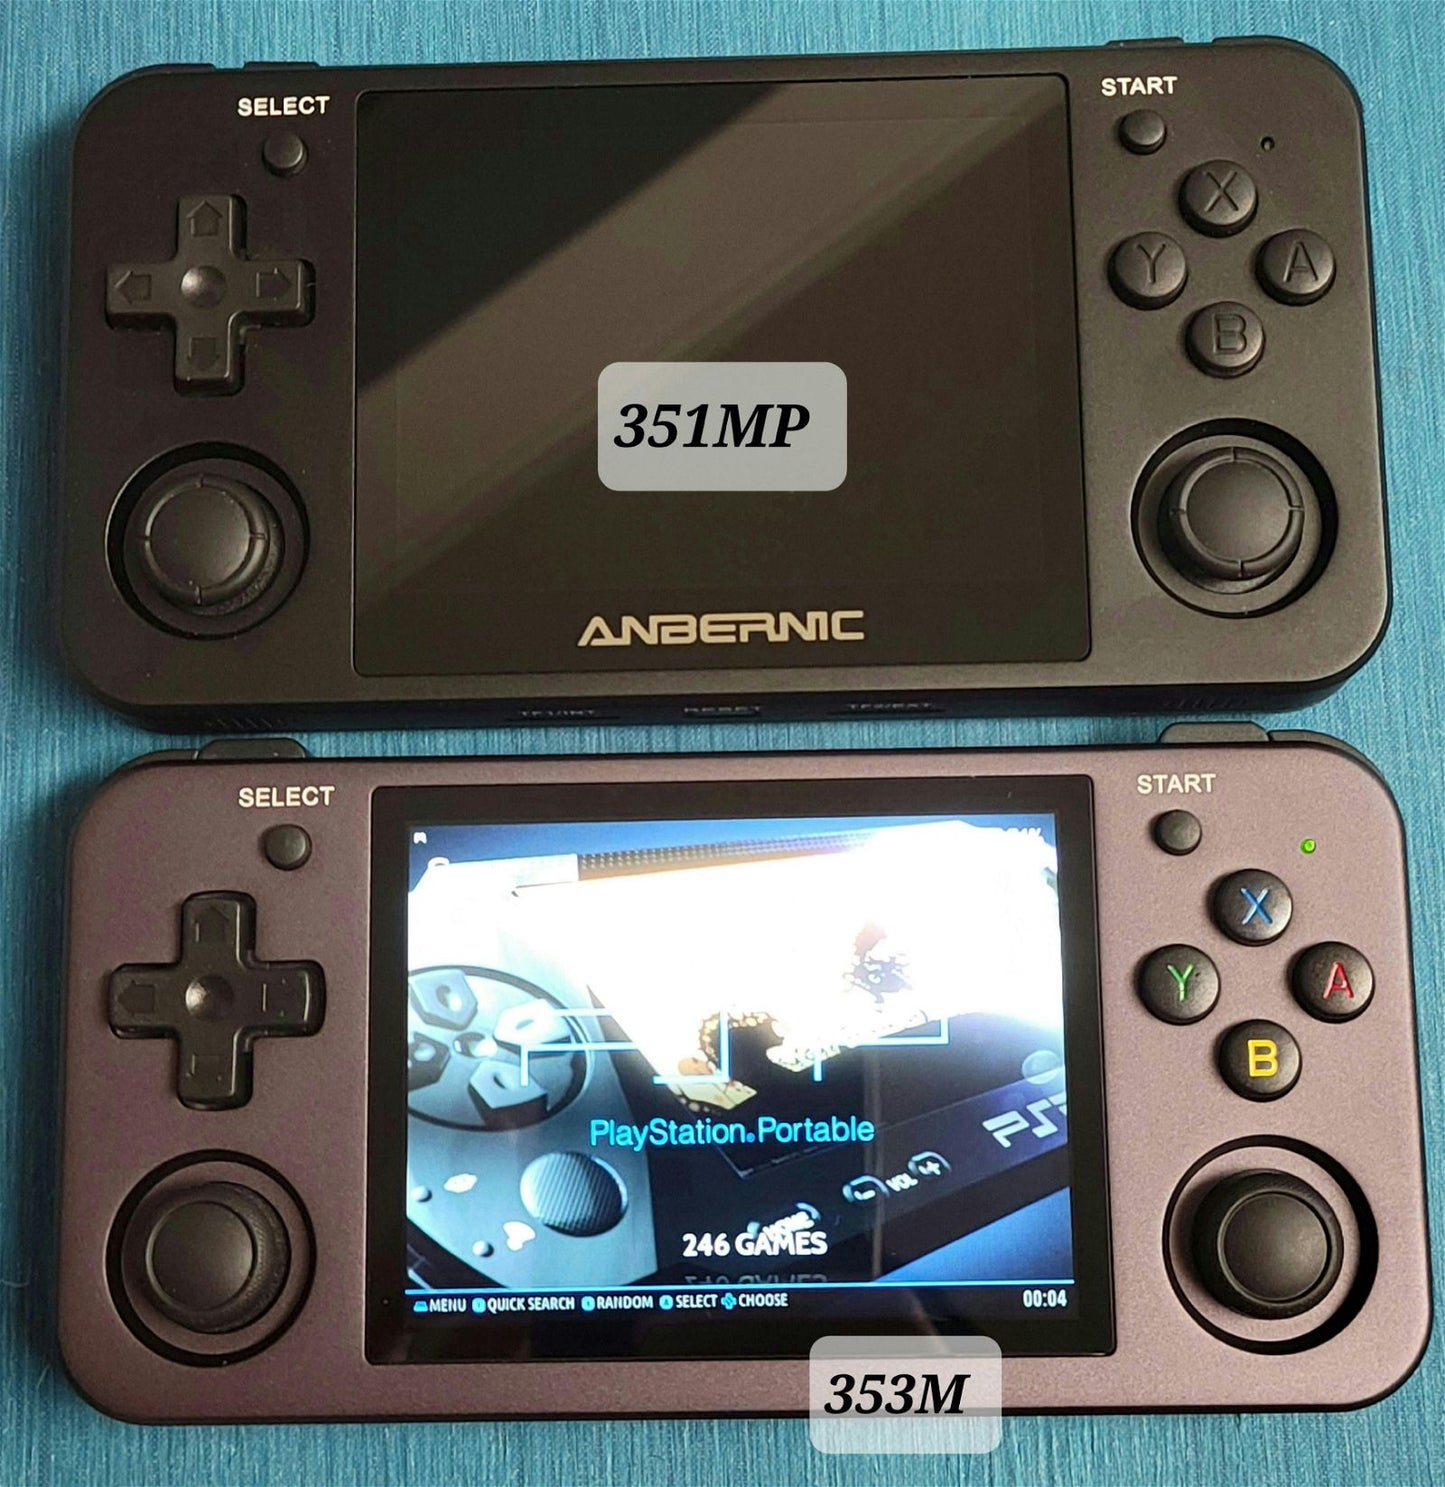 New Anbernic RG353M custom, configured Linux OS & Android, 256GB SD portable gaming handheld console - Arcadeclassics